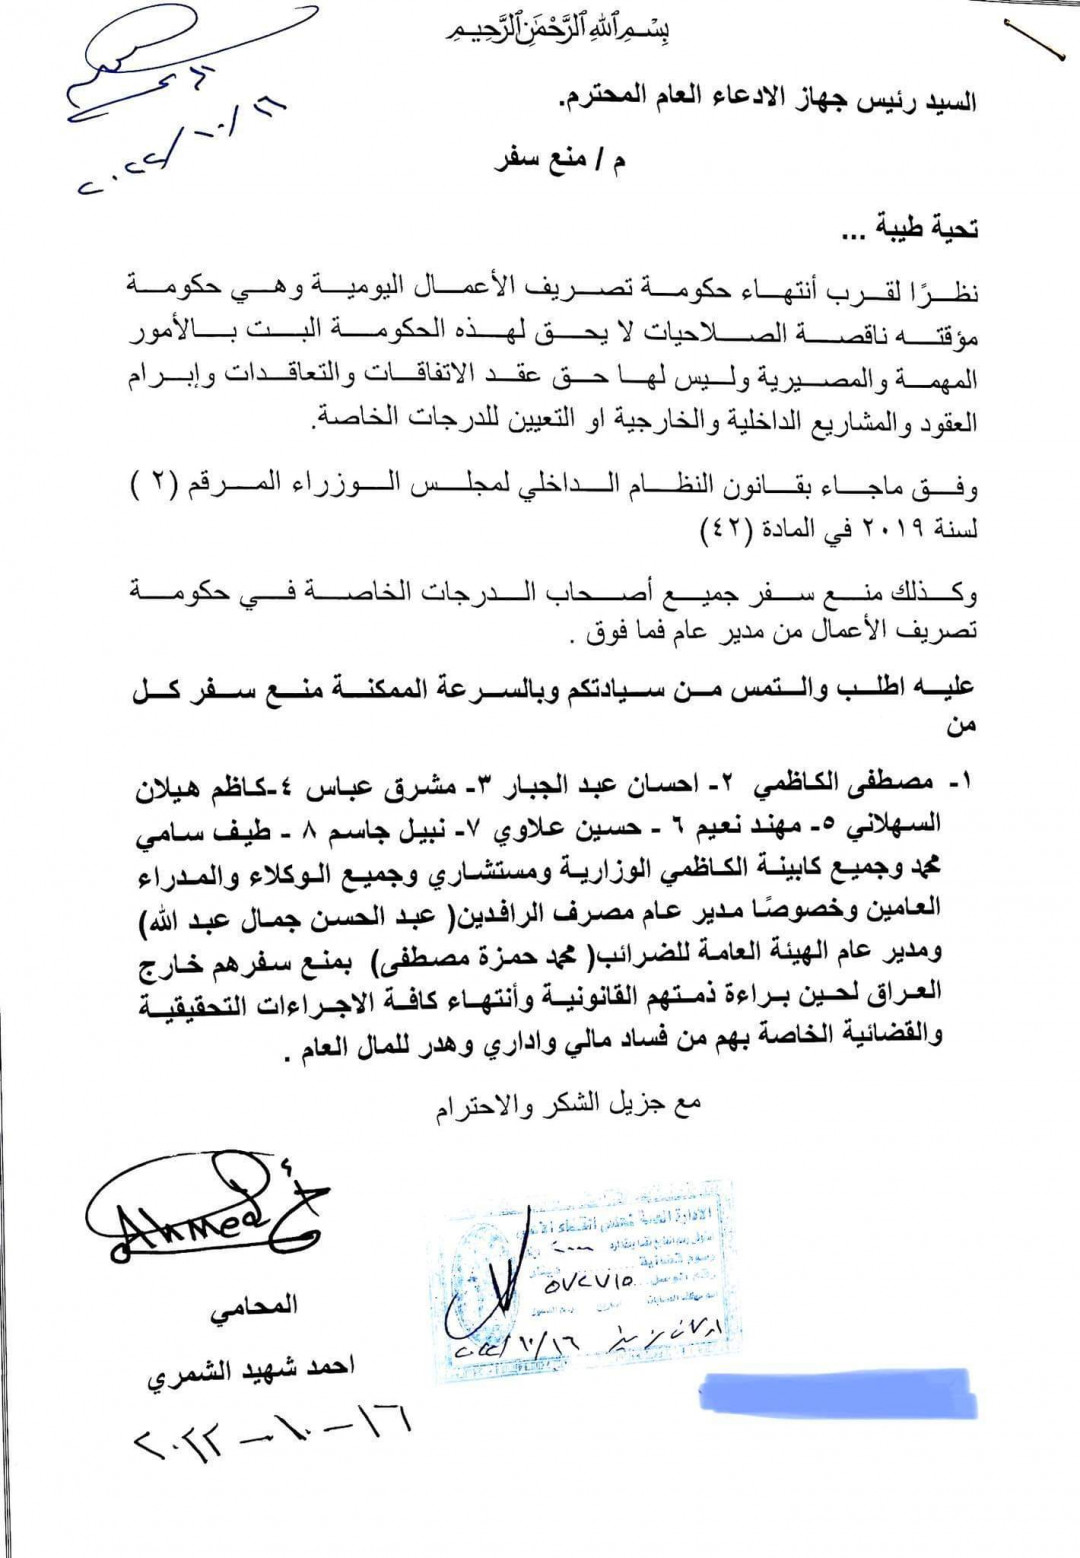 Document .. Submitting a request to the judiciary to prevent the travel of Al-Kazemi and his government formation, and the Sudanese threatens "corruption"